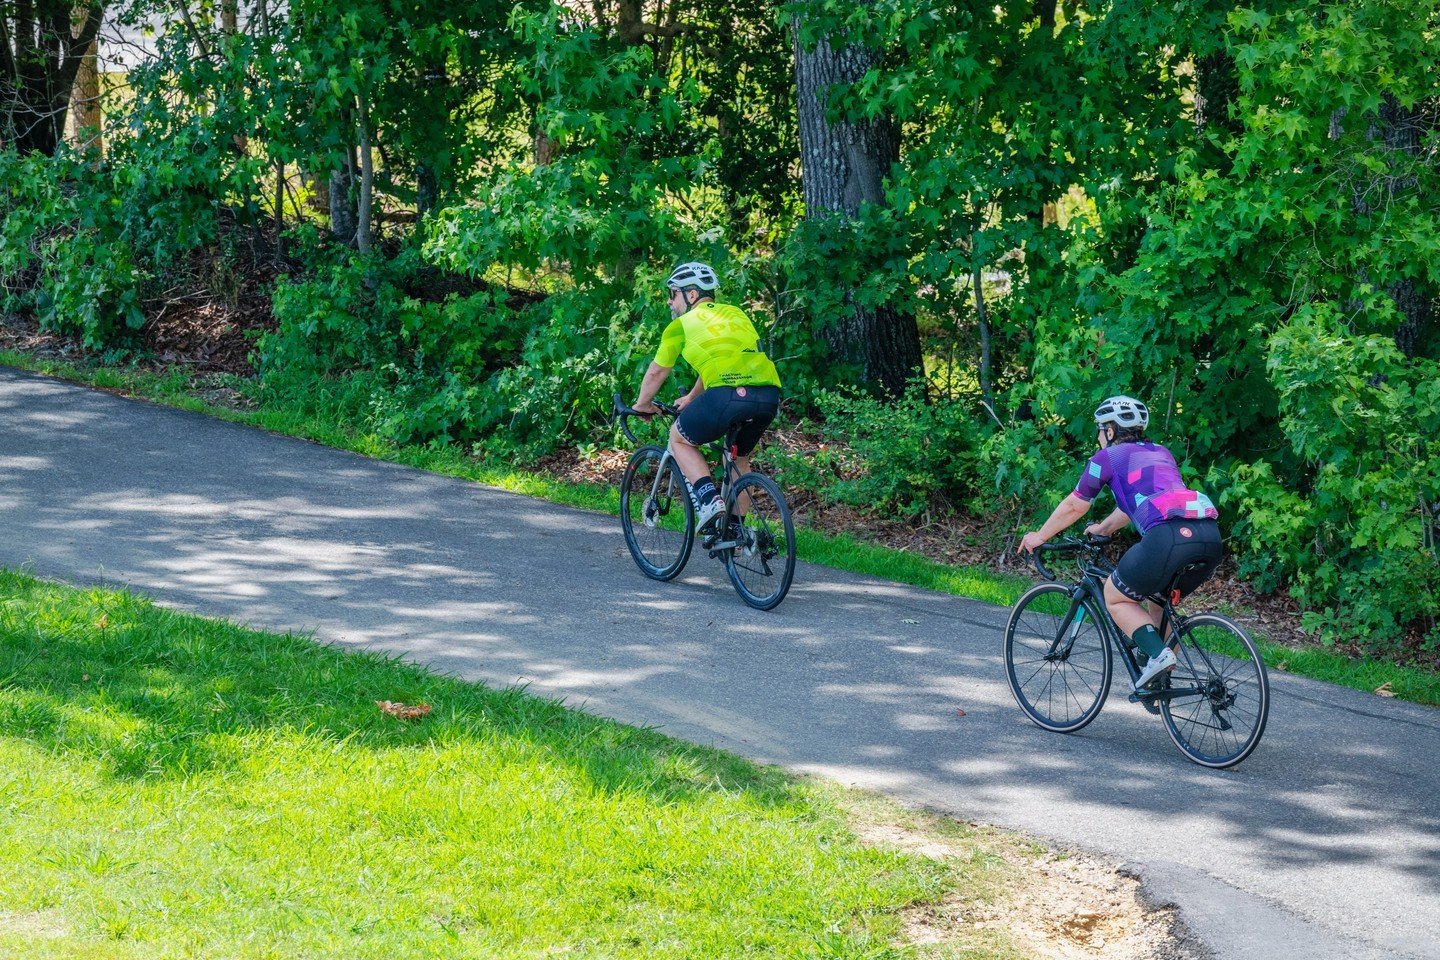 Experience the charm of River's Rest Marina &amp; Resort, nestled along the serene Chickahominy River! Bike the scenic Virginia Capital Trail between Richmond and Williamsburg for an unforgettable adventure. 

Book your getaway today and let the expl